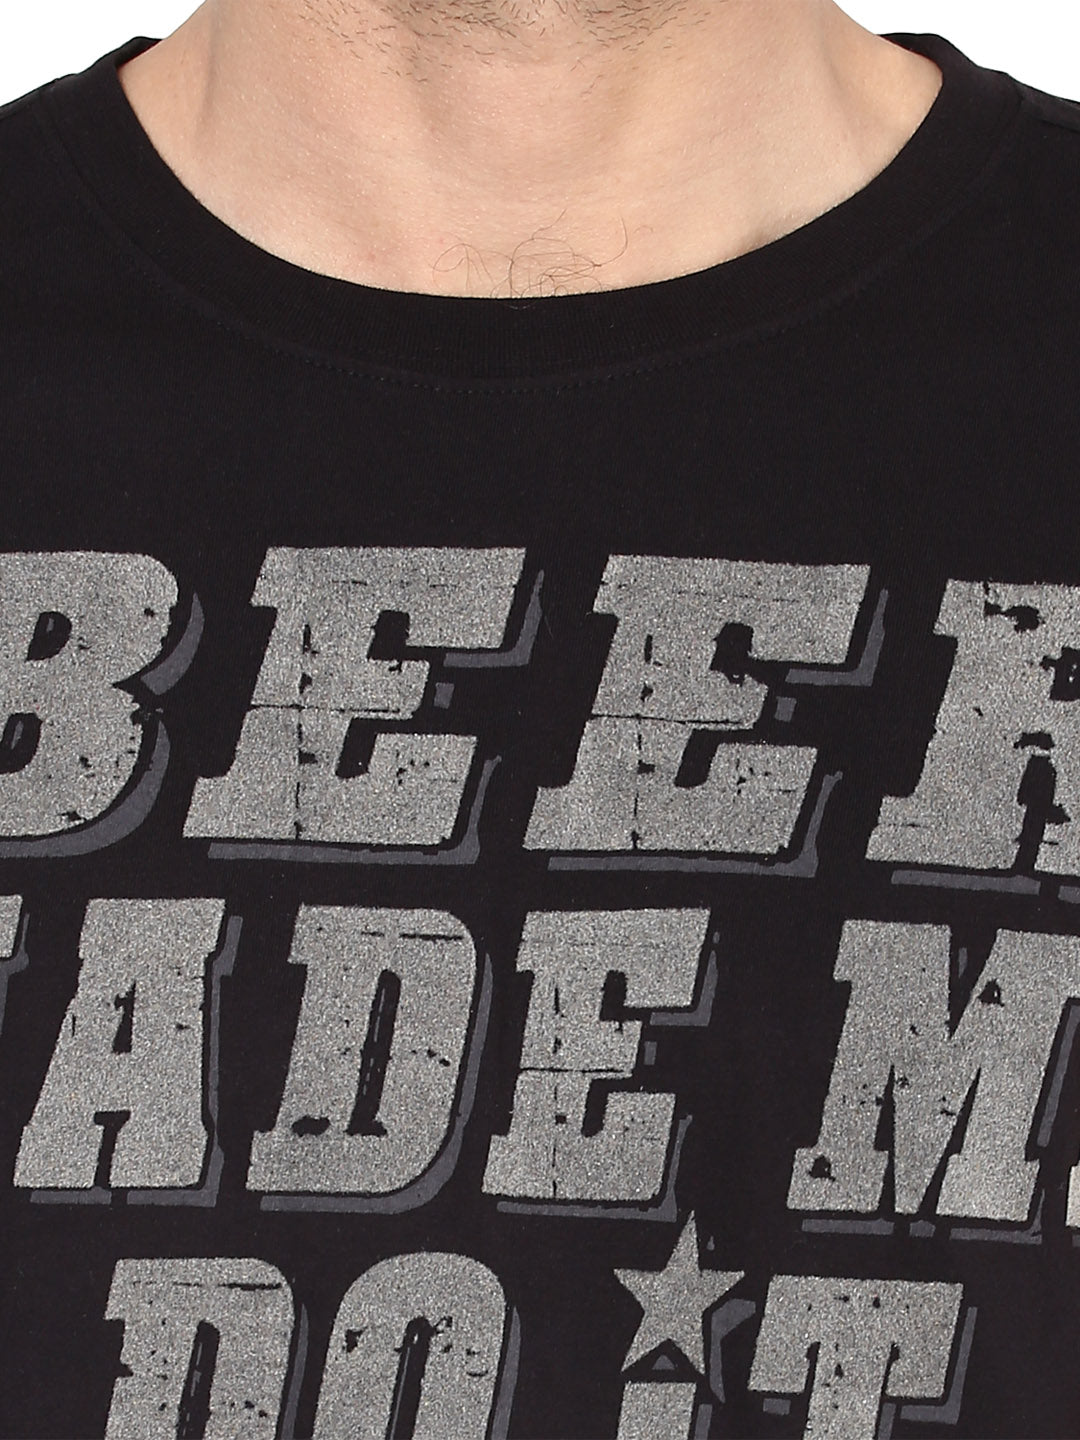 BEER-MADE-ME-DO